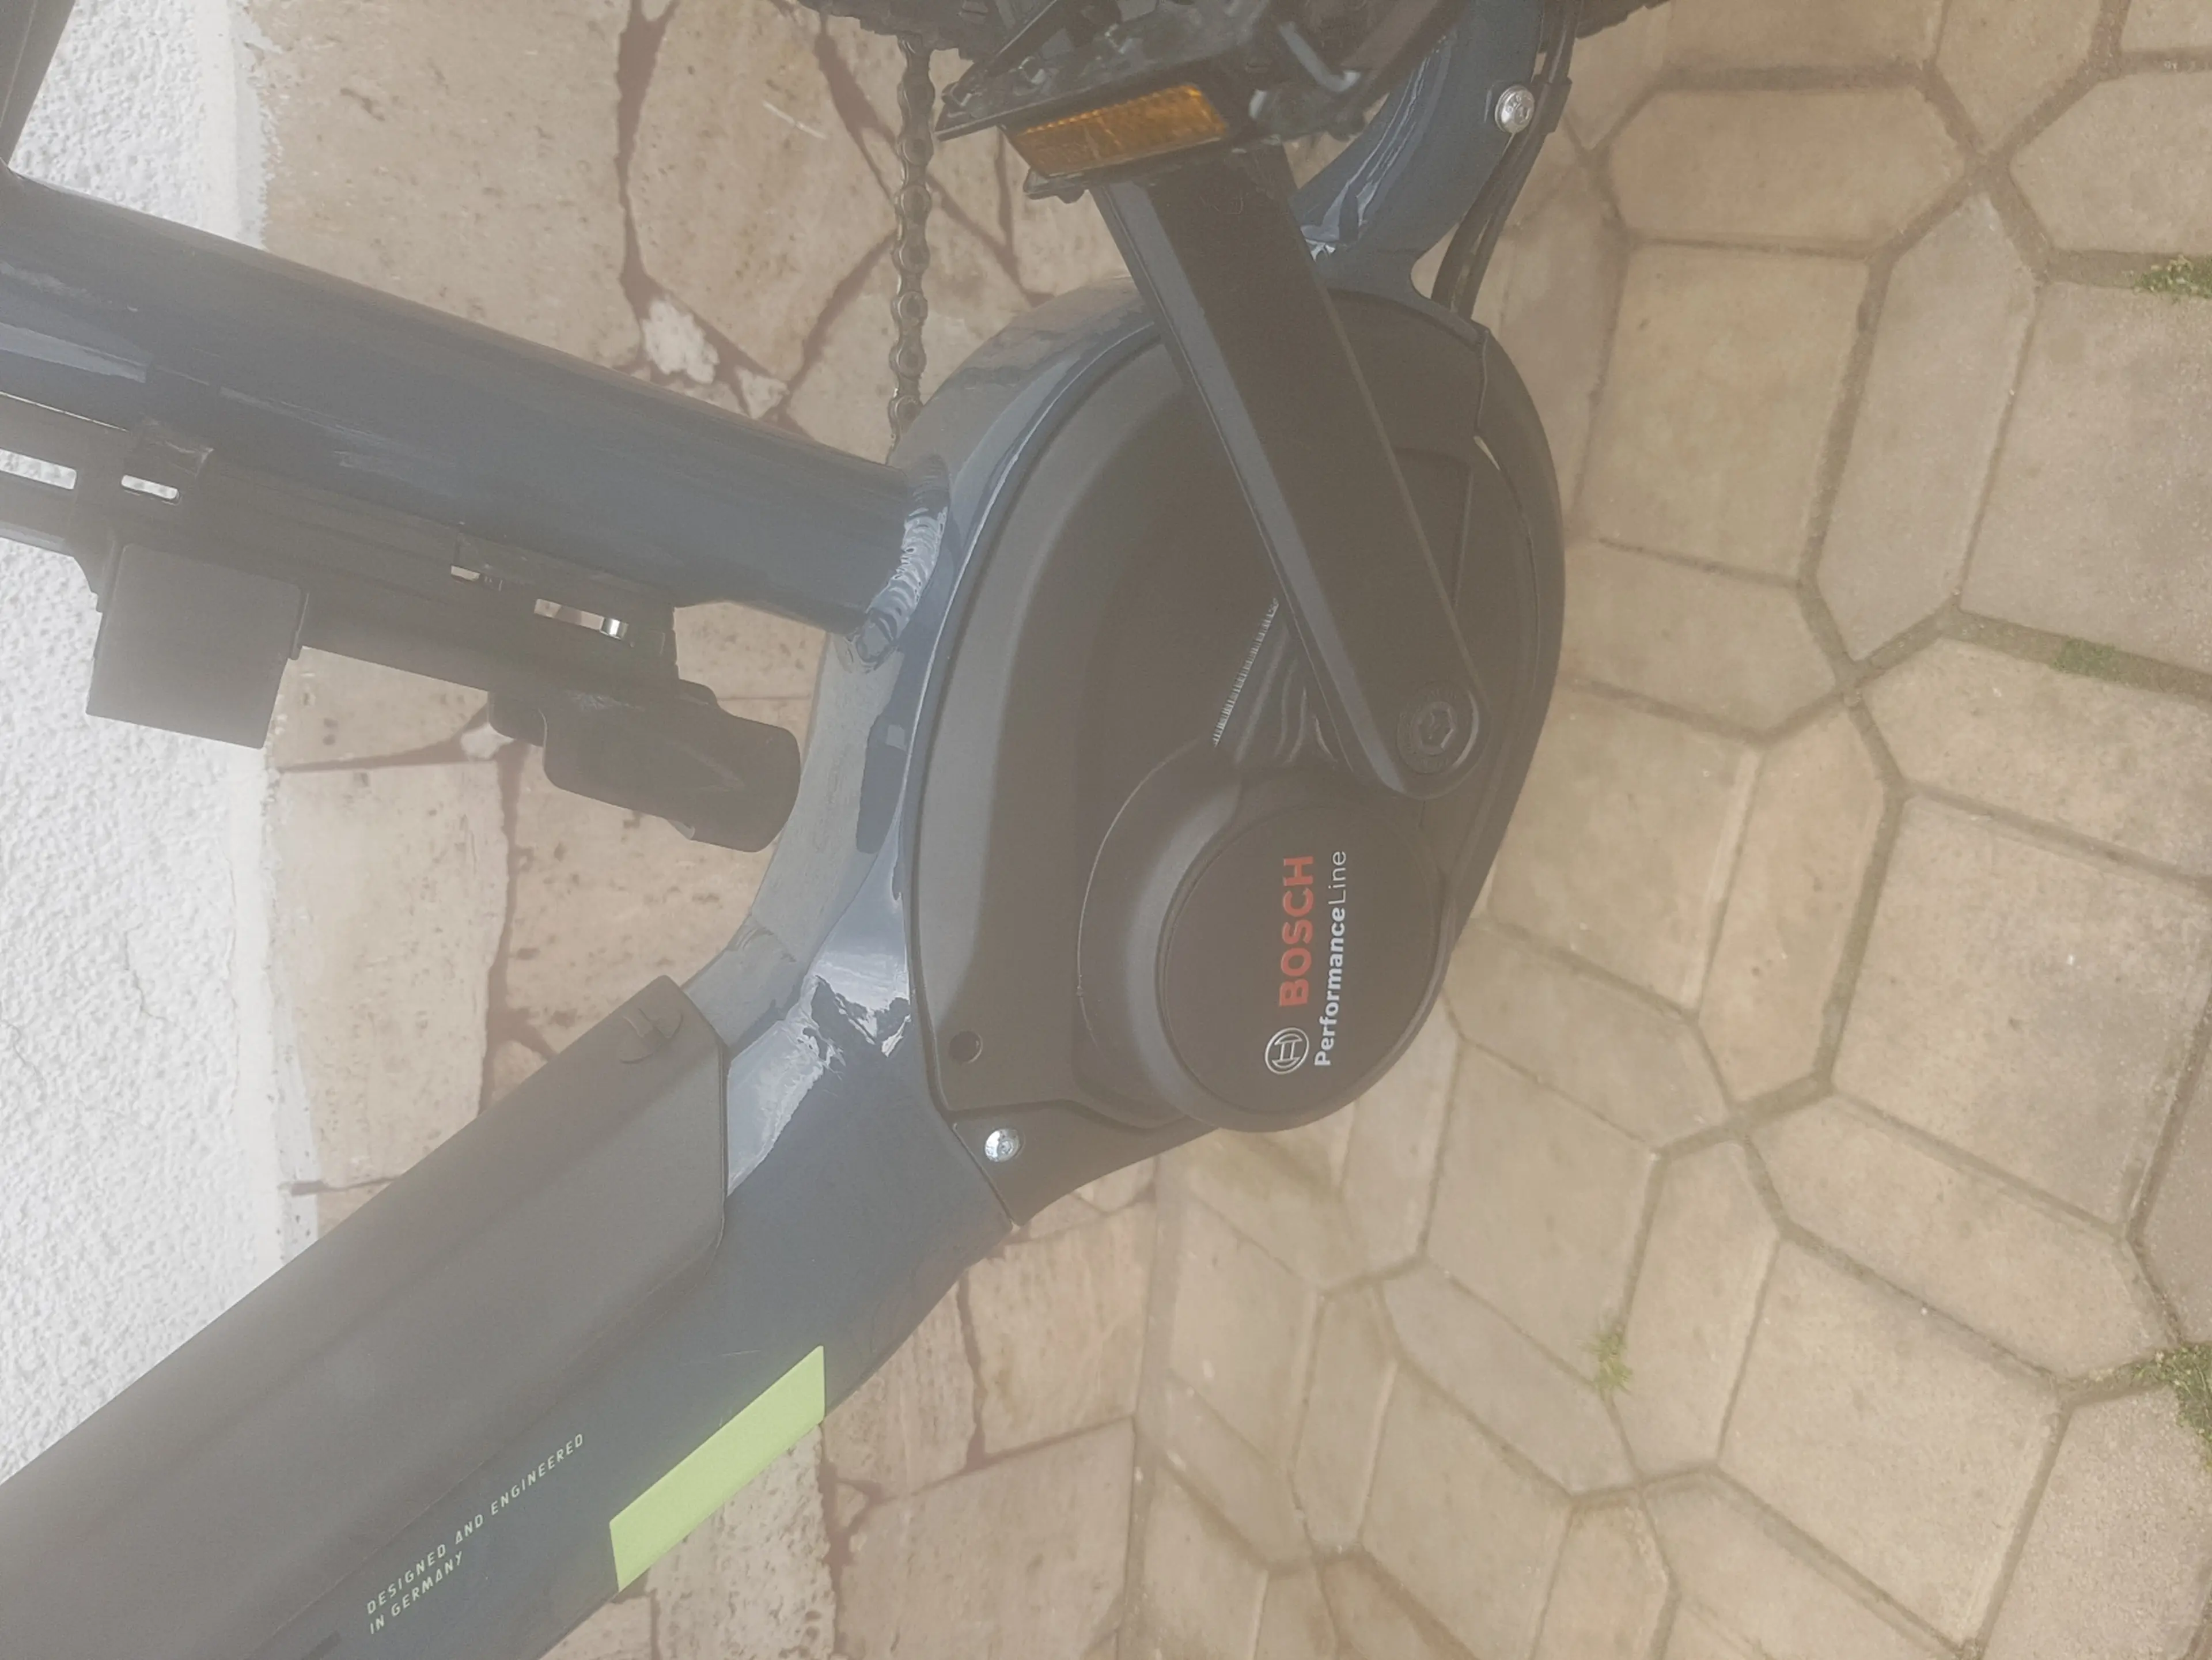 6. Haibike Hardseven electric